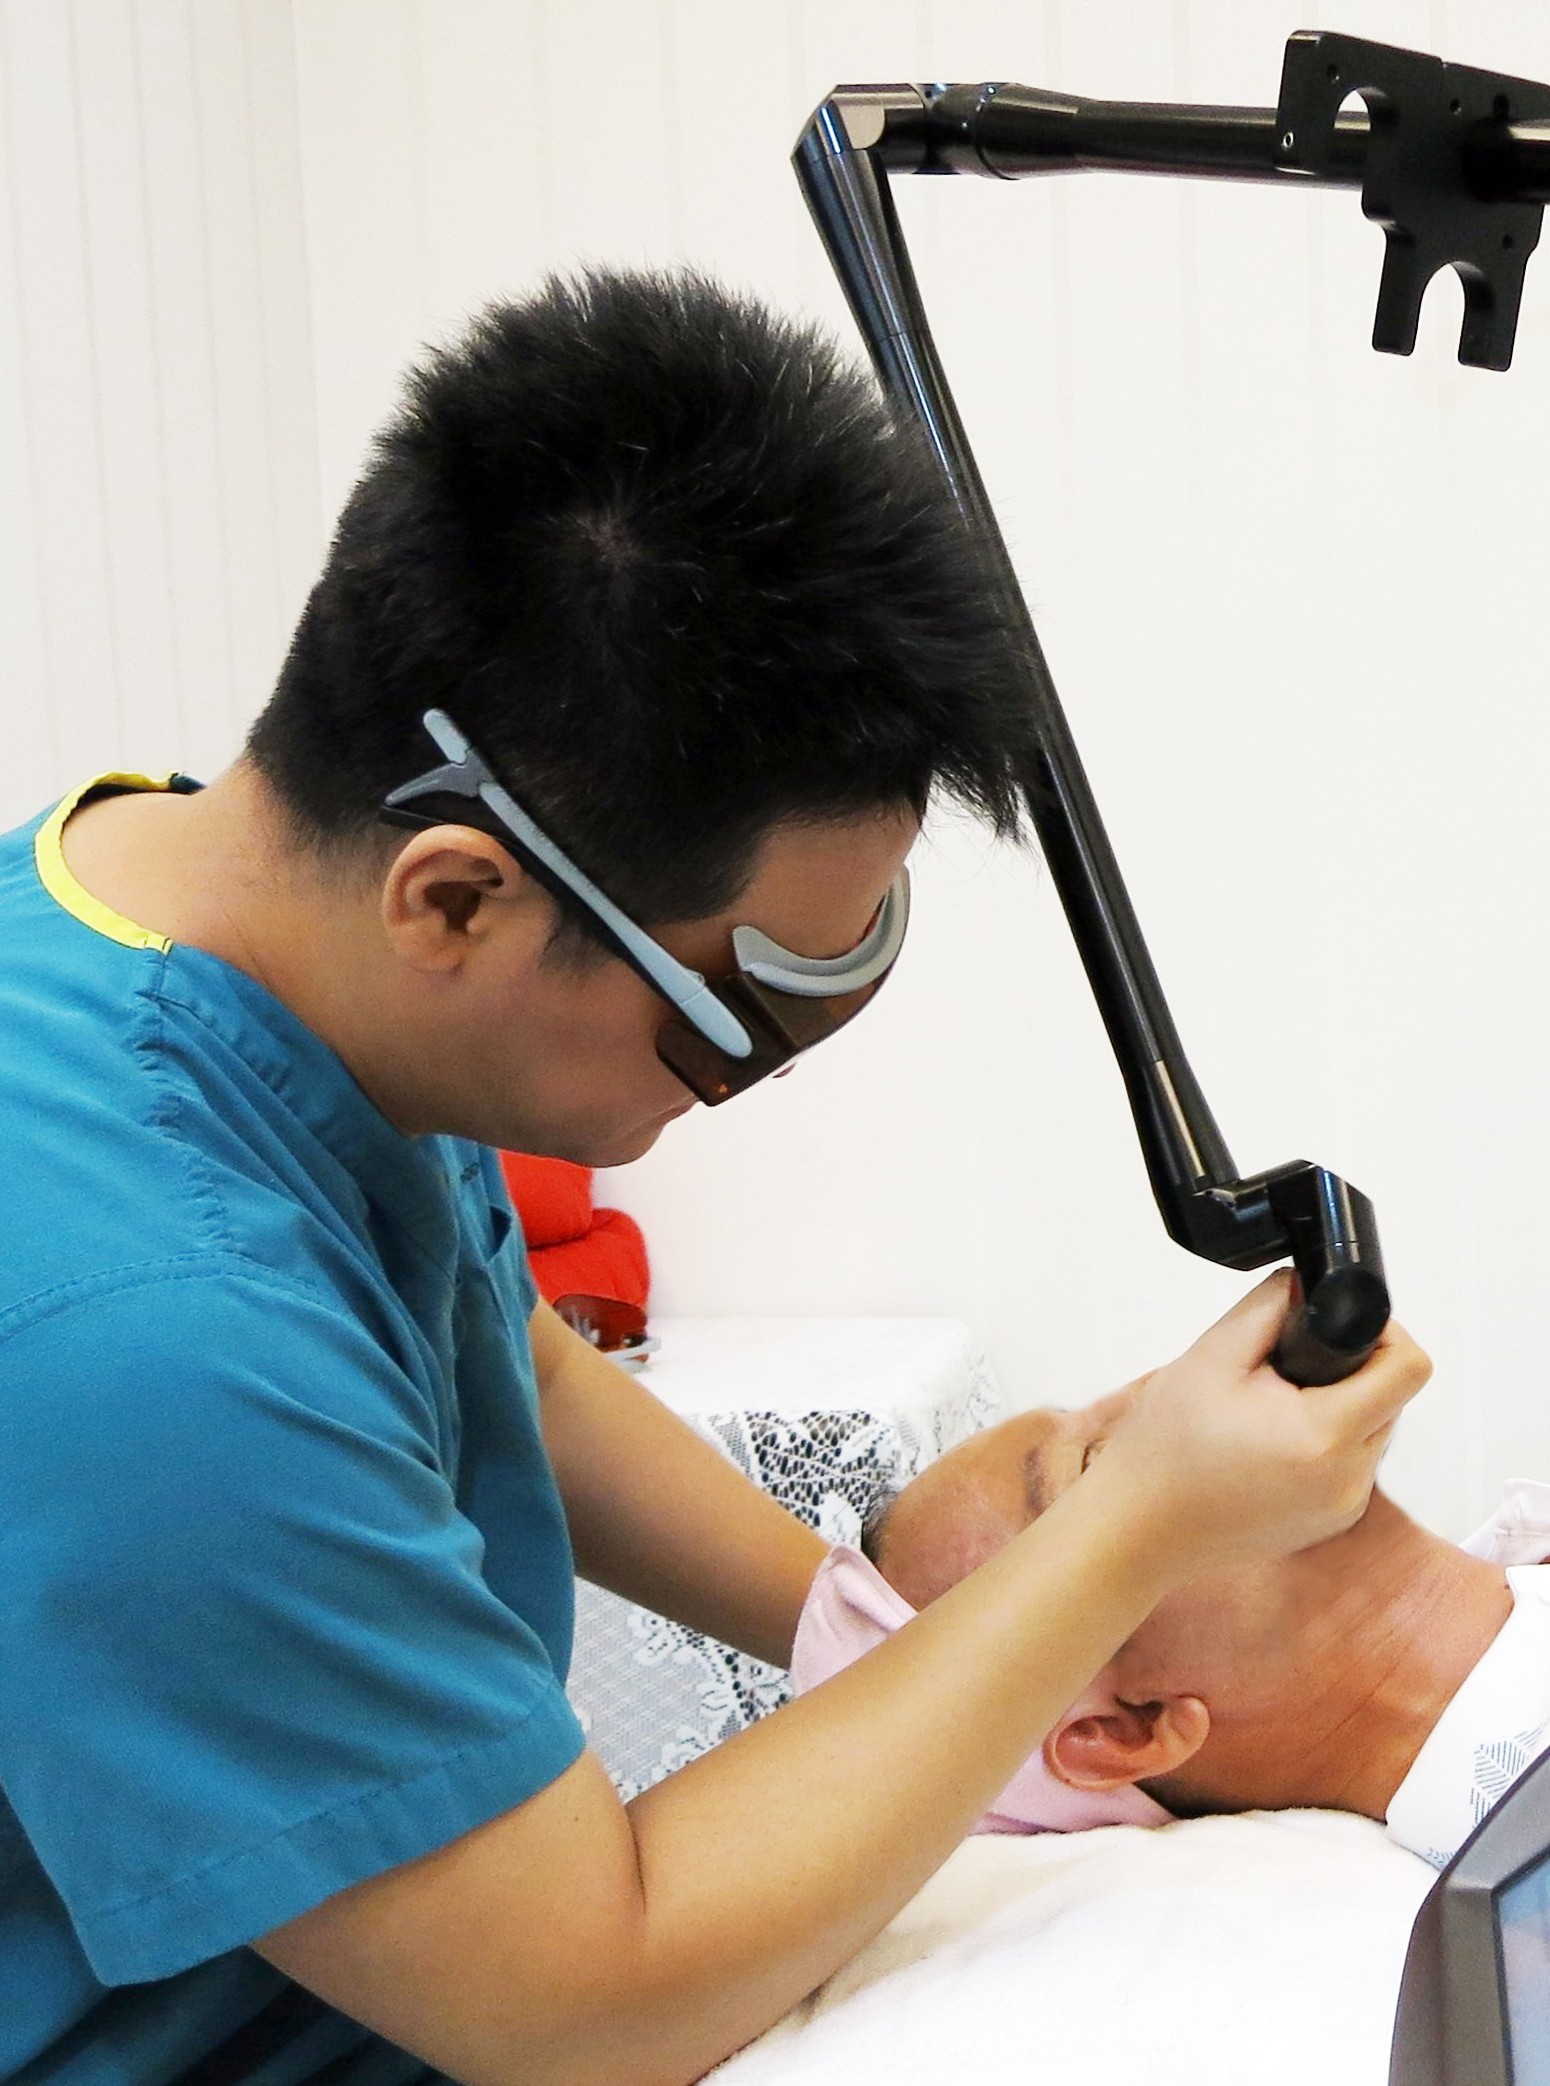 A client undergoing cosmetic laser treatment for a client. Photo: Ben Chang